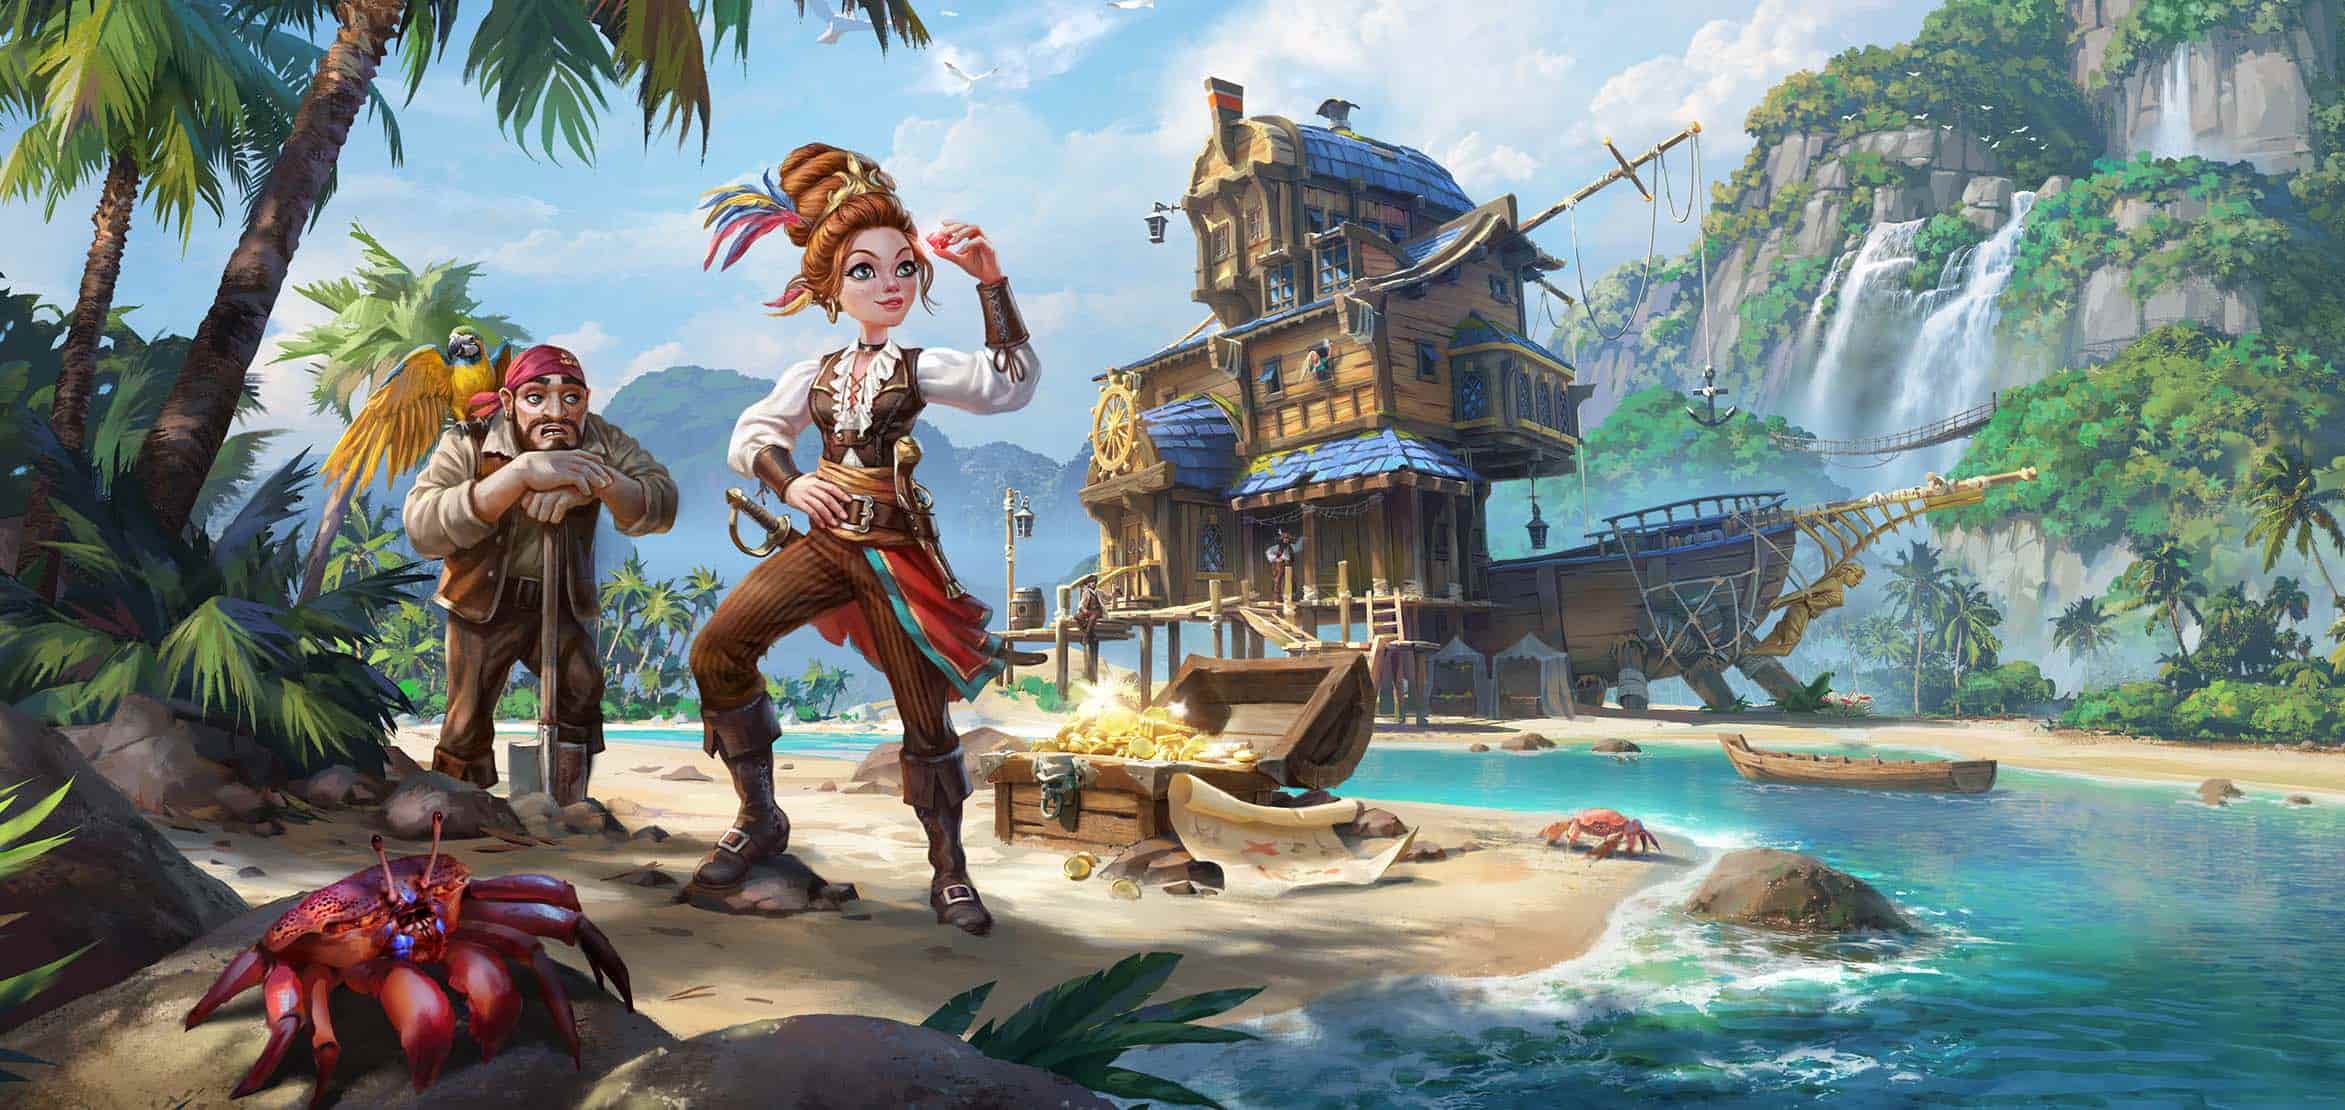 forge of empires summer event 2019 challenges